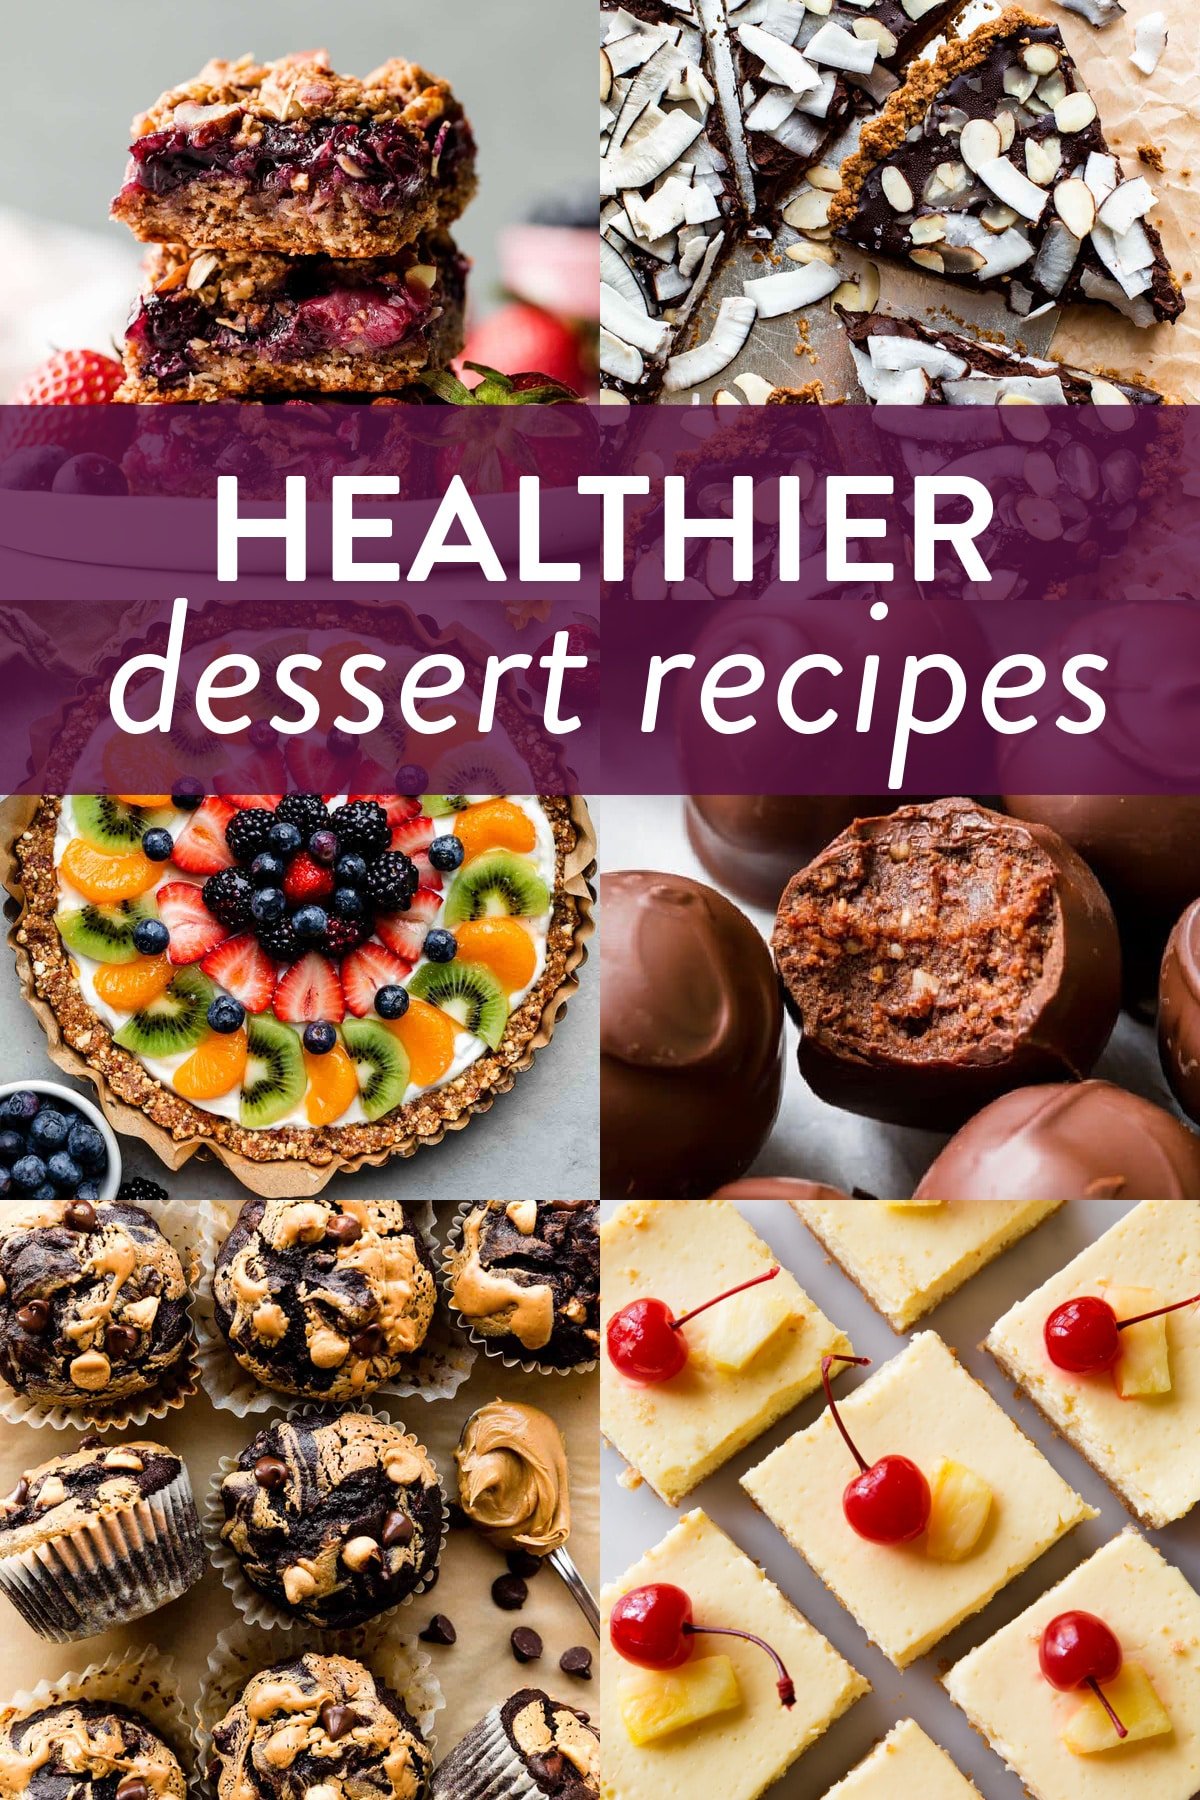 collage of healthy dessert recipes pictures including berry streusel bars, chocolate coconut tart, fruit tart, peanut butter chocolate swirl banana muffins, and pineapple yogurt bars.